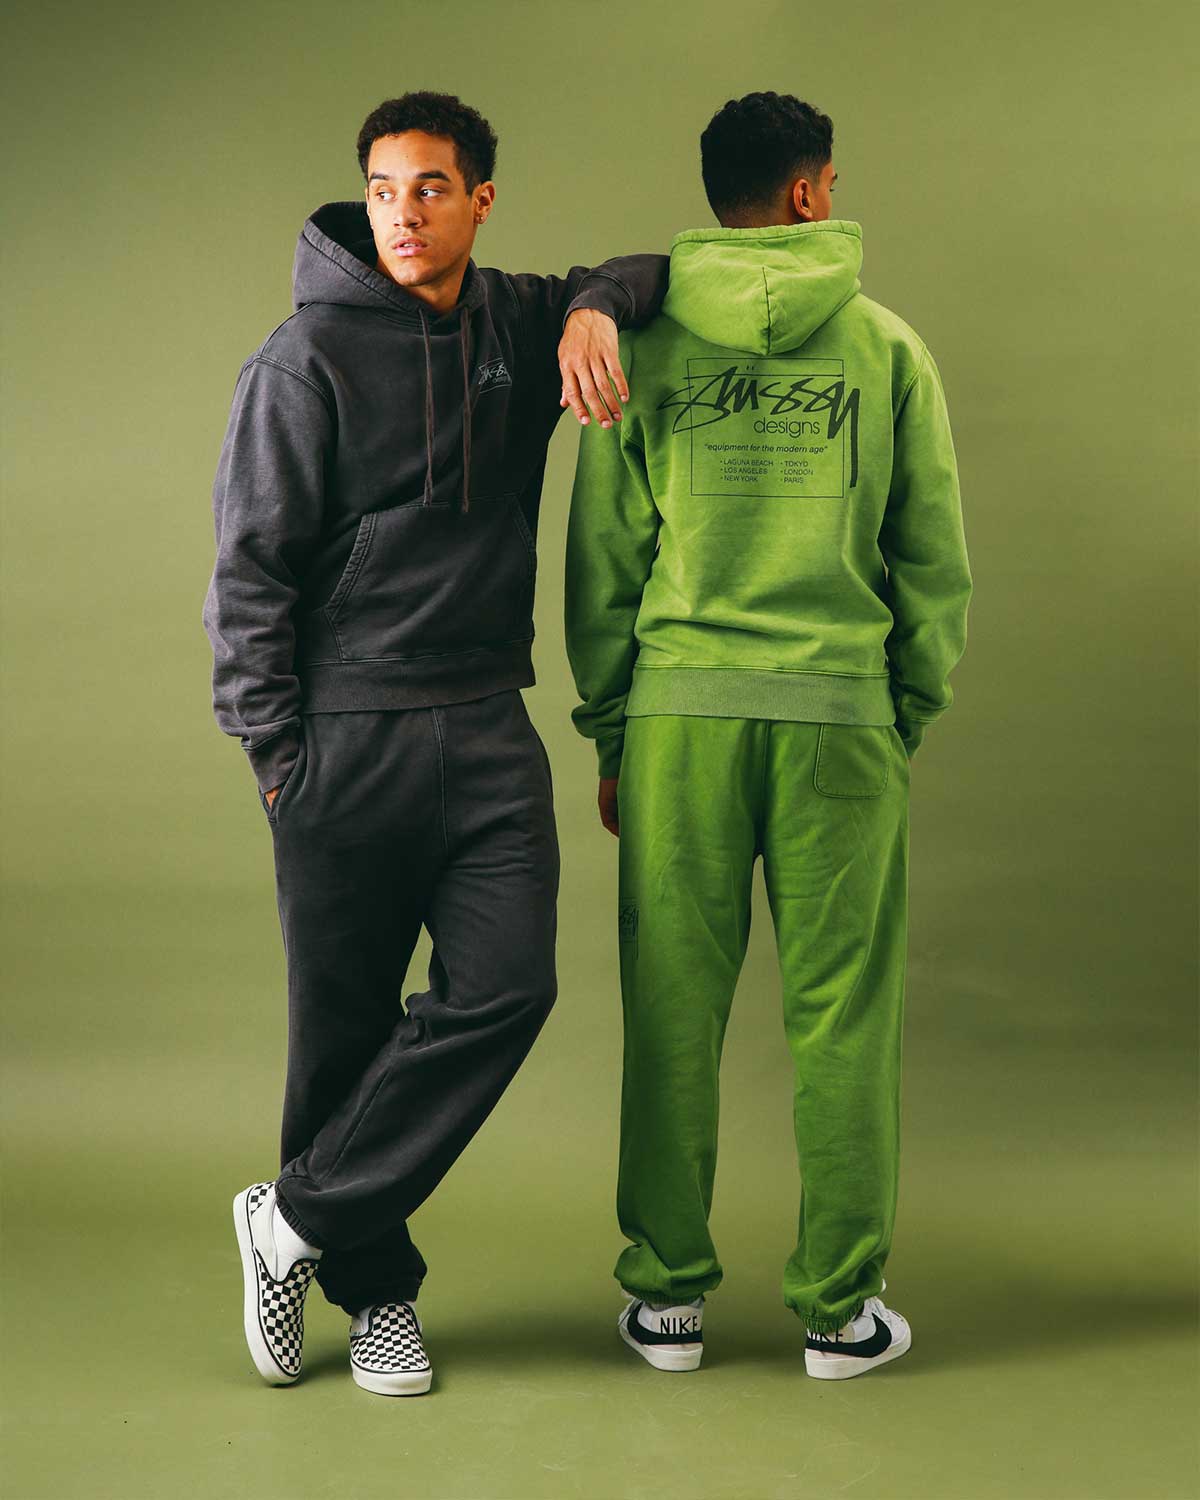 The new Stüssy collection is now available 